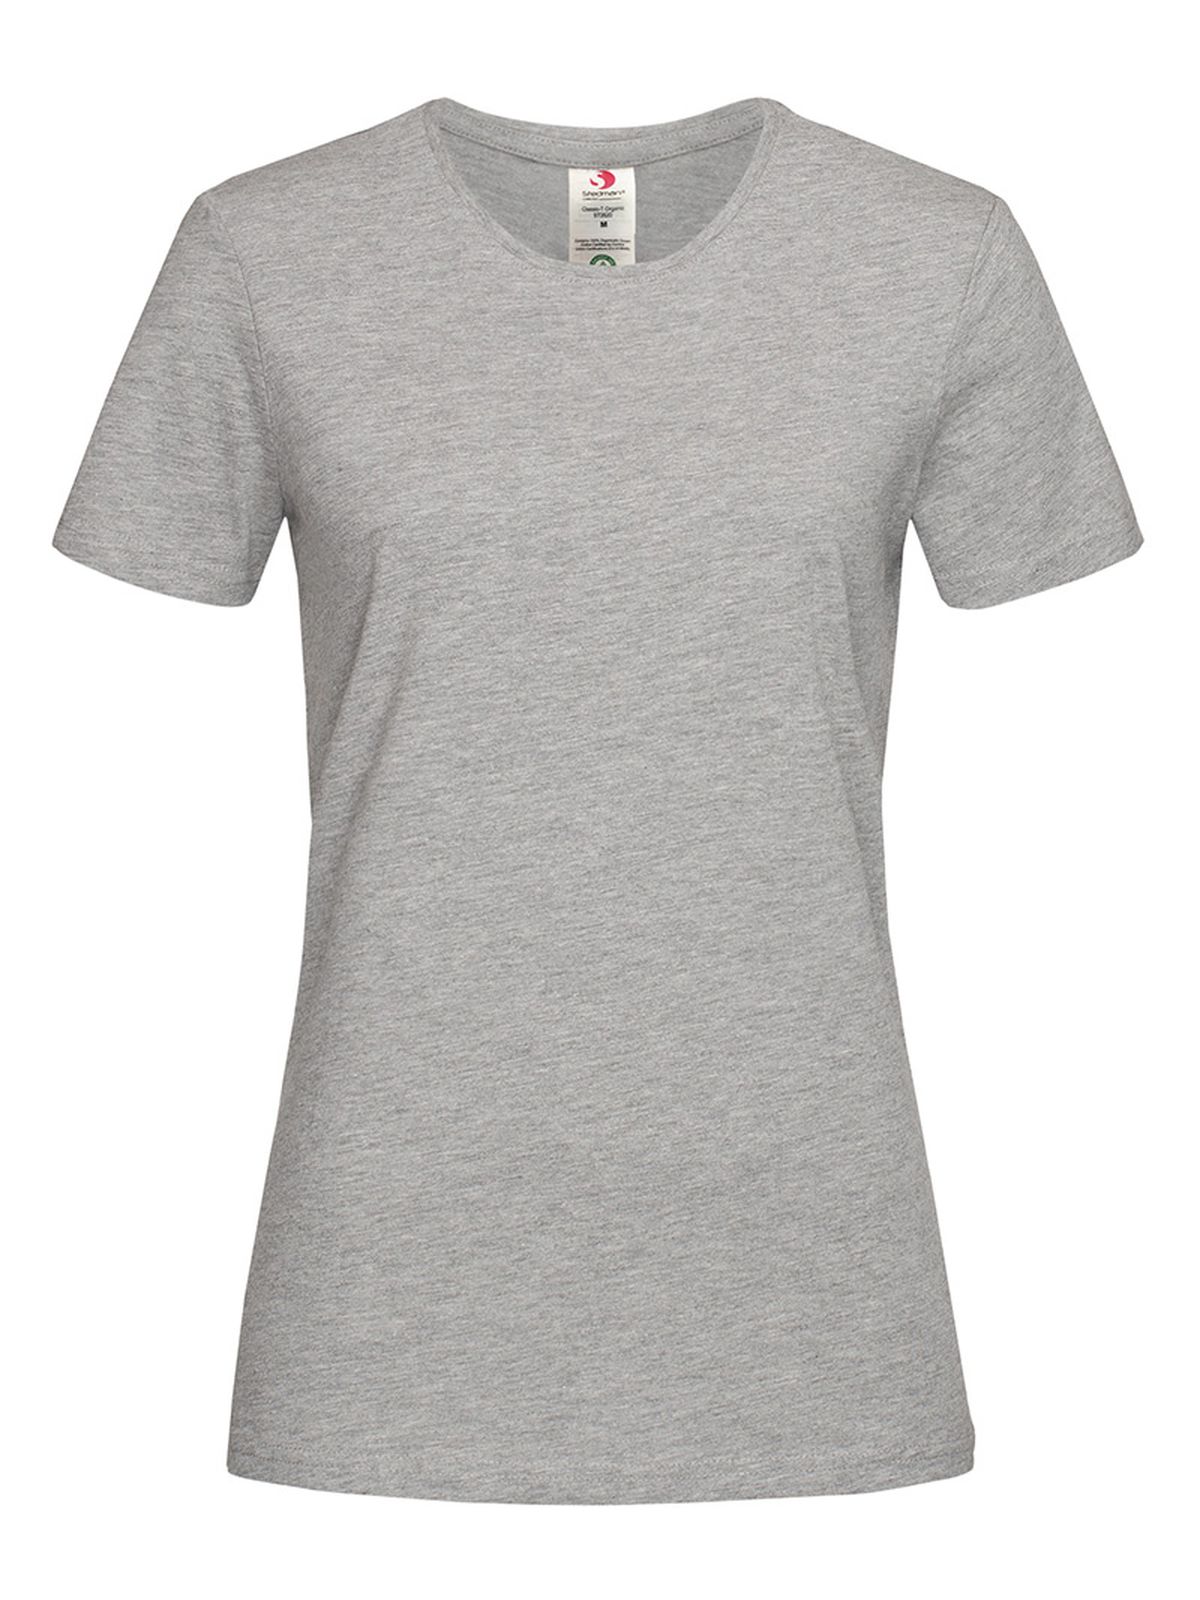 classic-t-organic-fitted-grey-heather.webp